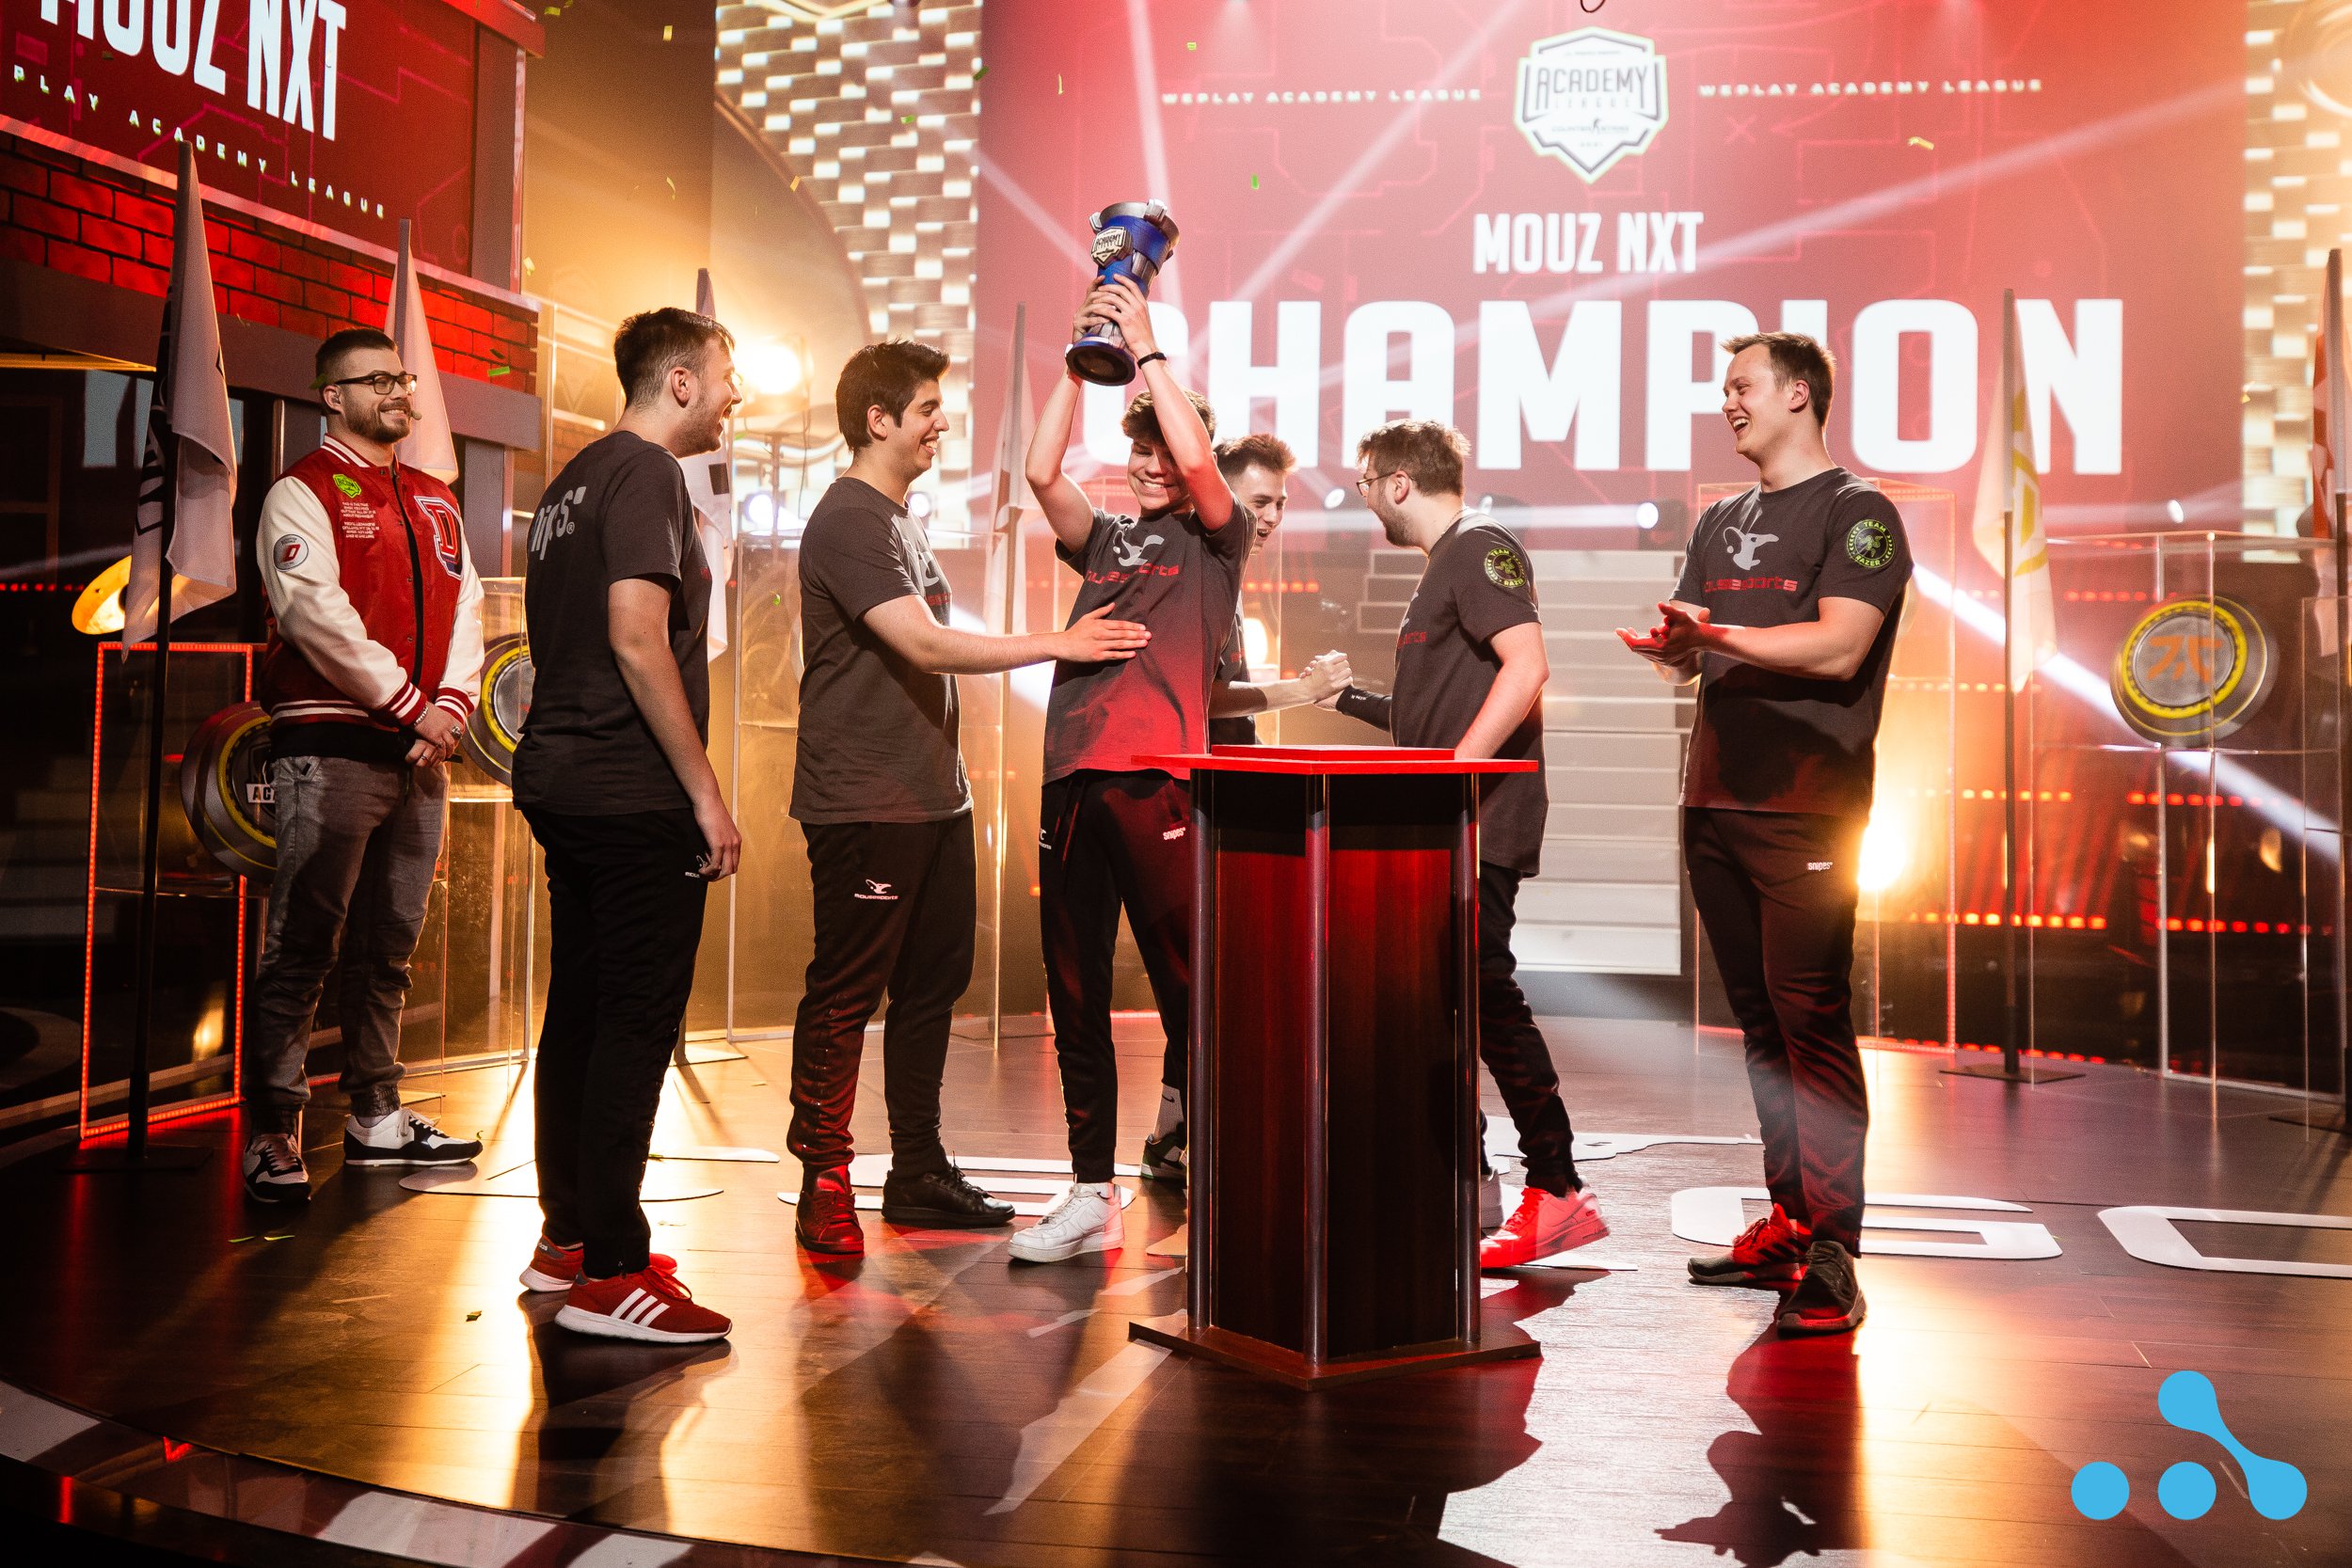 MOUZ NXT are the champions once again